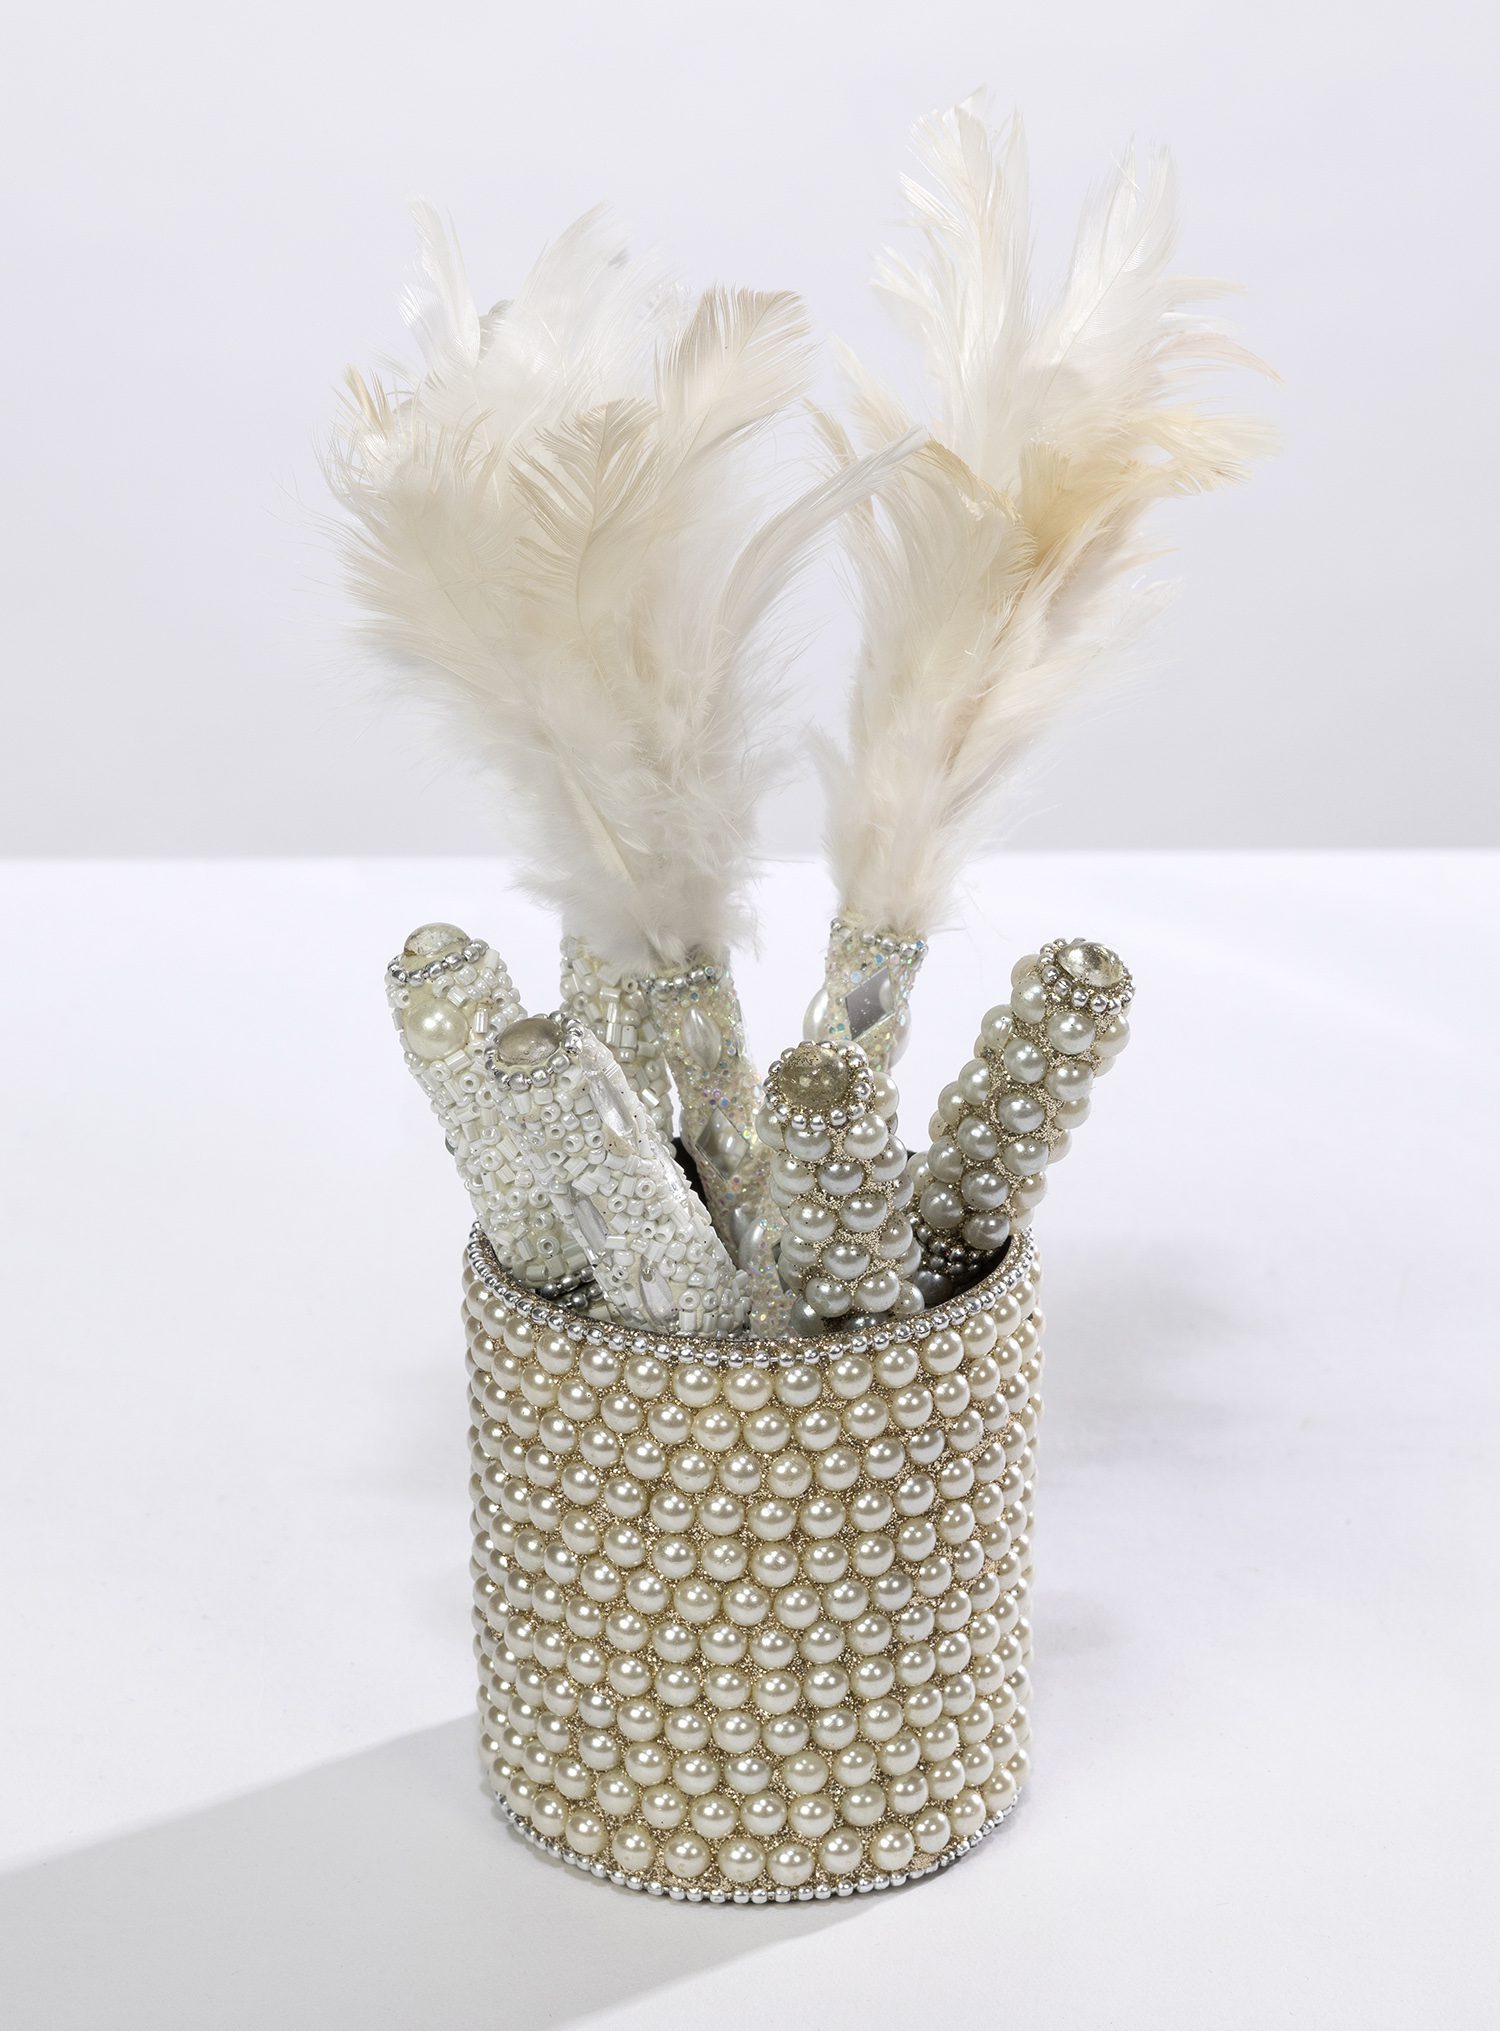 Pearl pen pot or make up brush holder makes a great gift for a young lady.